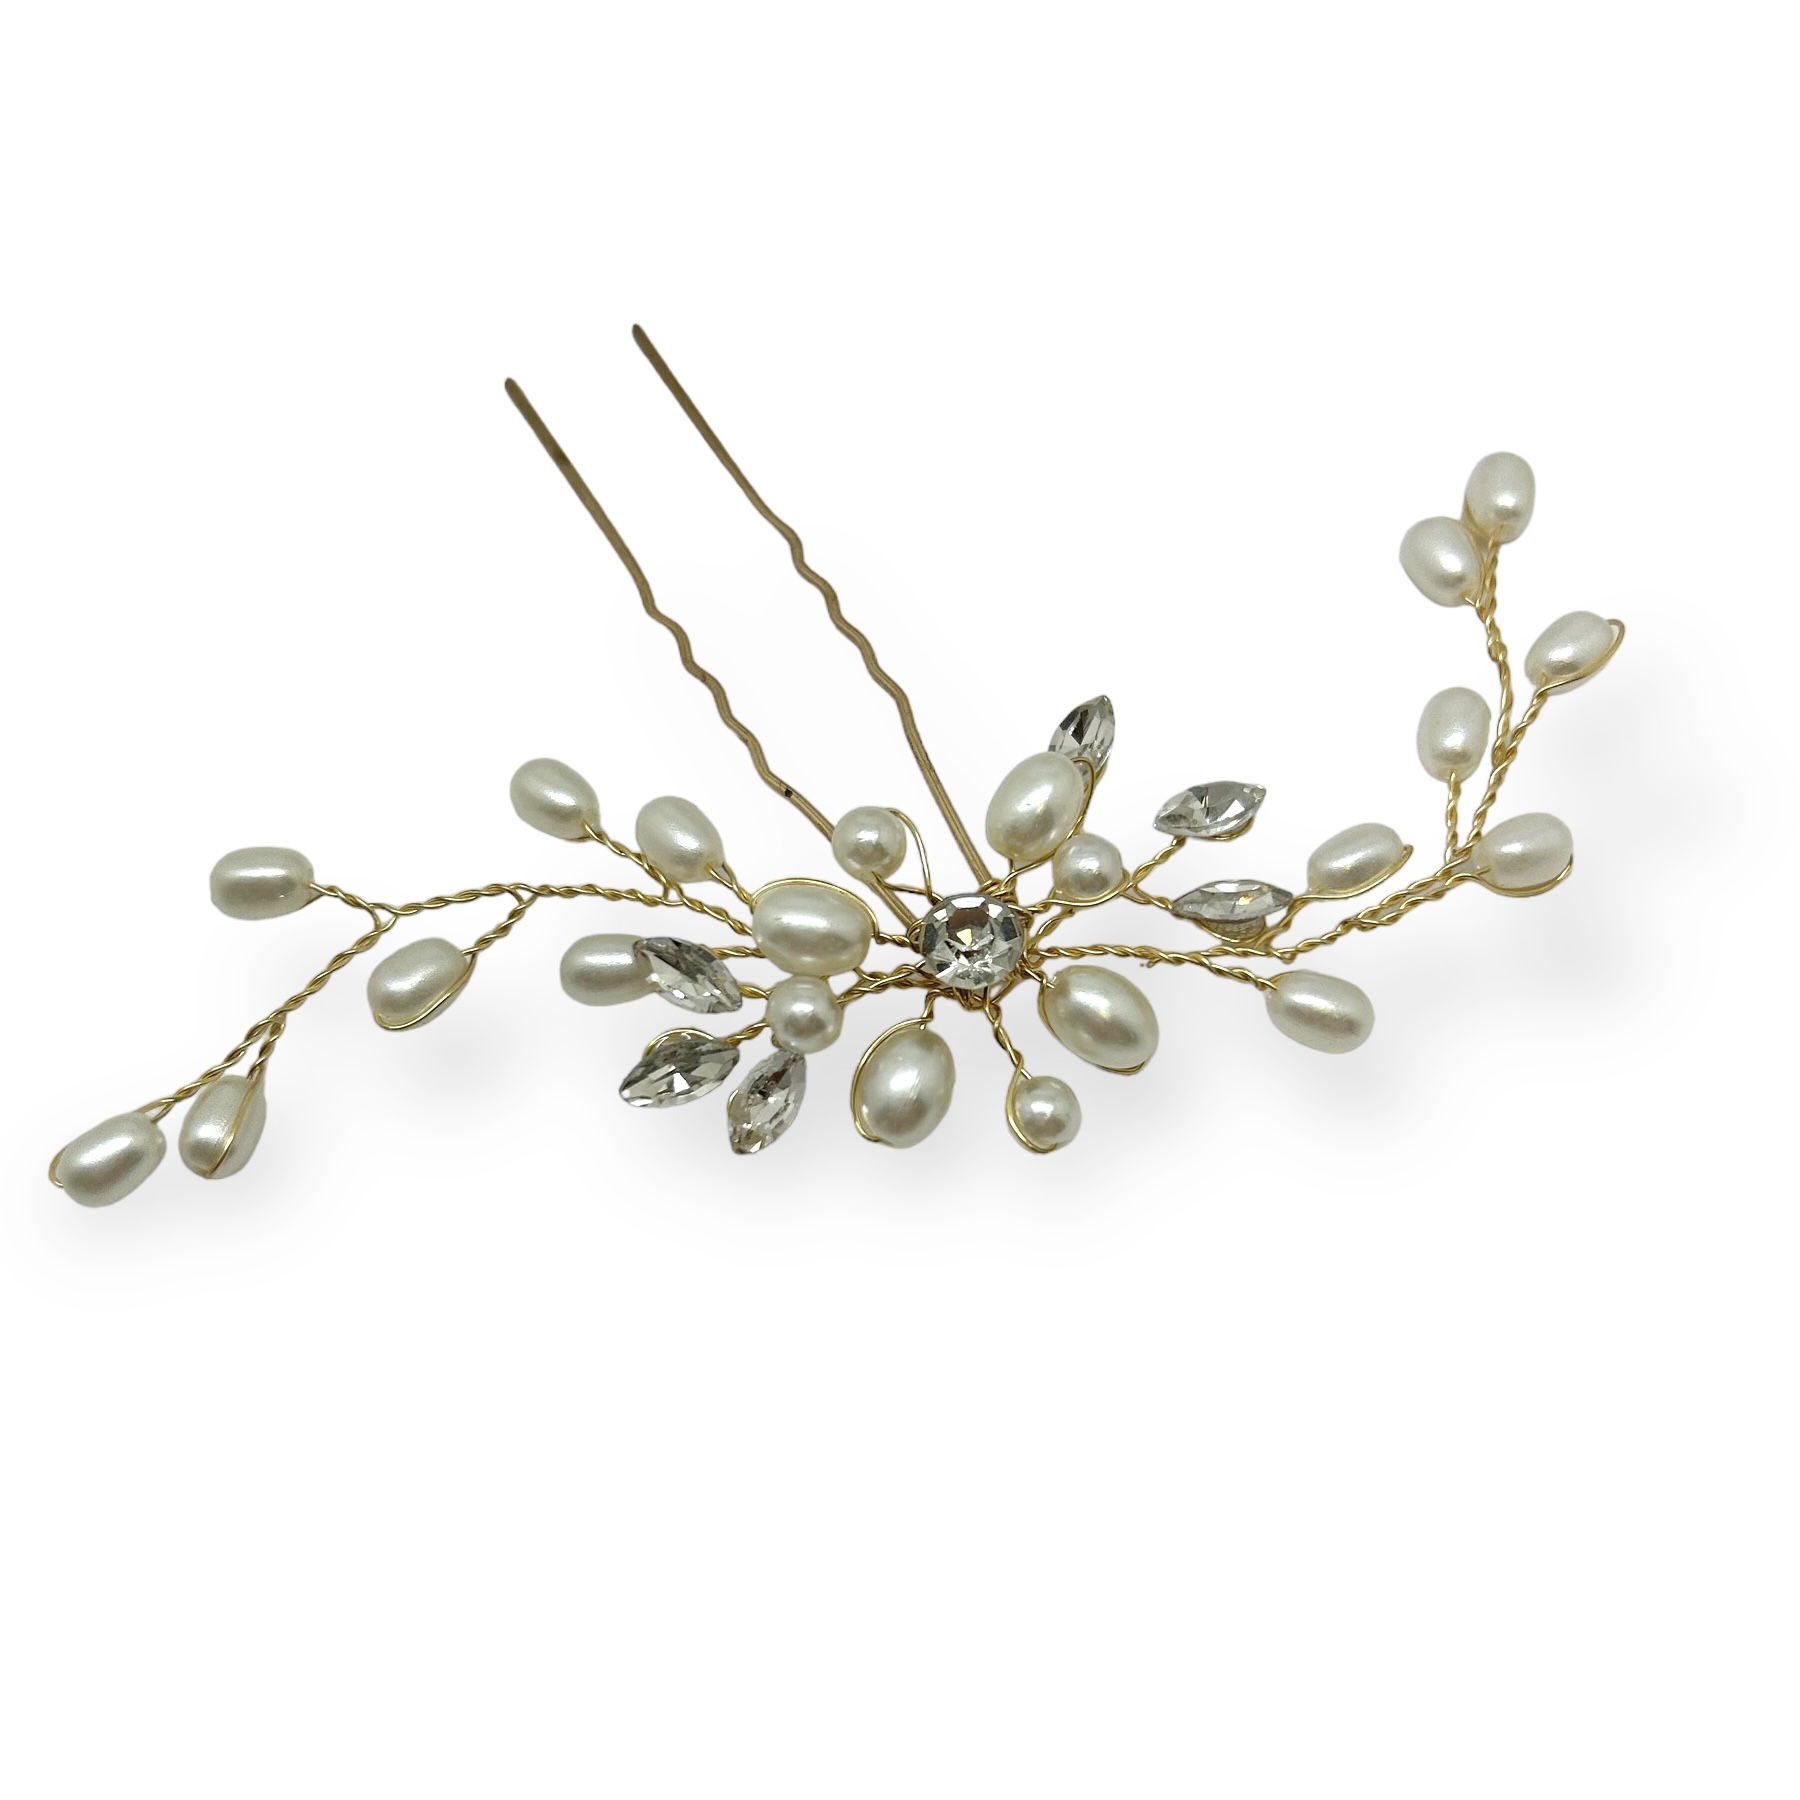 Pearl Gold Hair Clip|Kantuta|Jeanette Maree|Shop Online Now